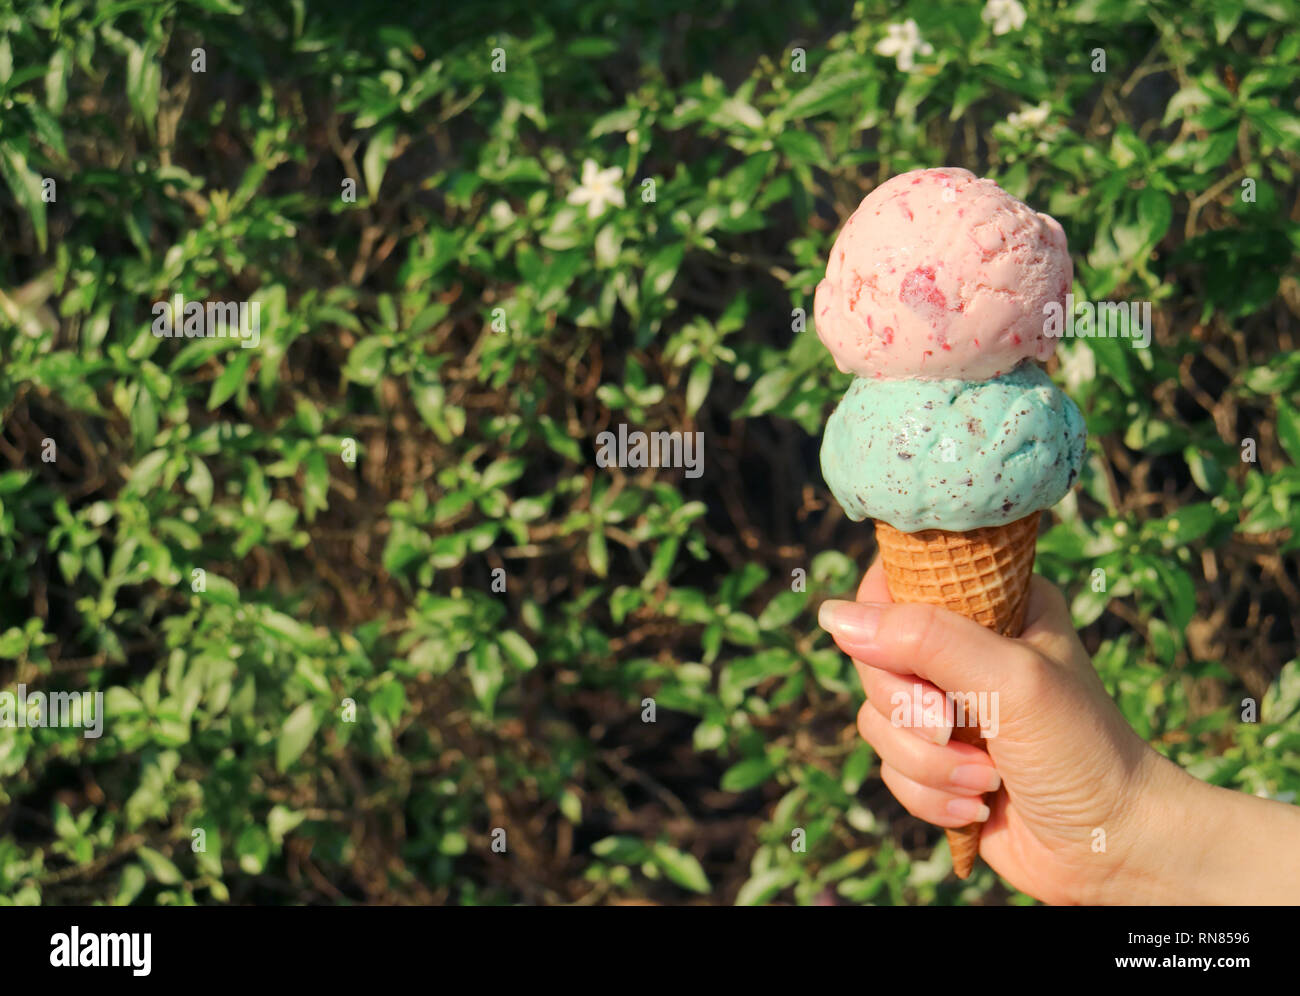 Two scoops ice cream cone in hand against blurry flowering tree with free space for text or design Stock Photo